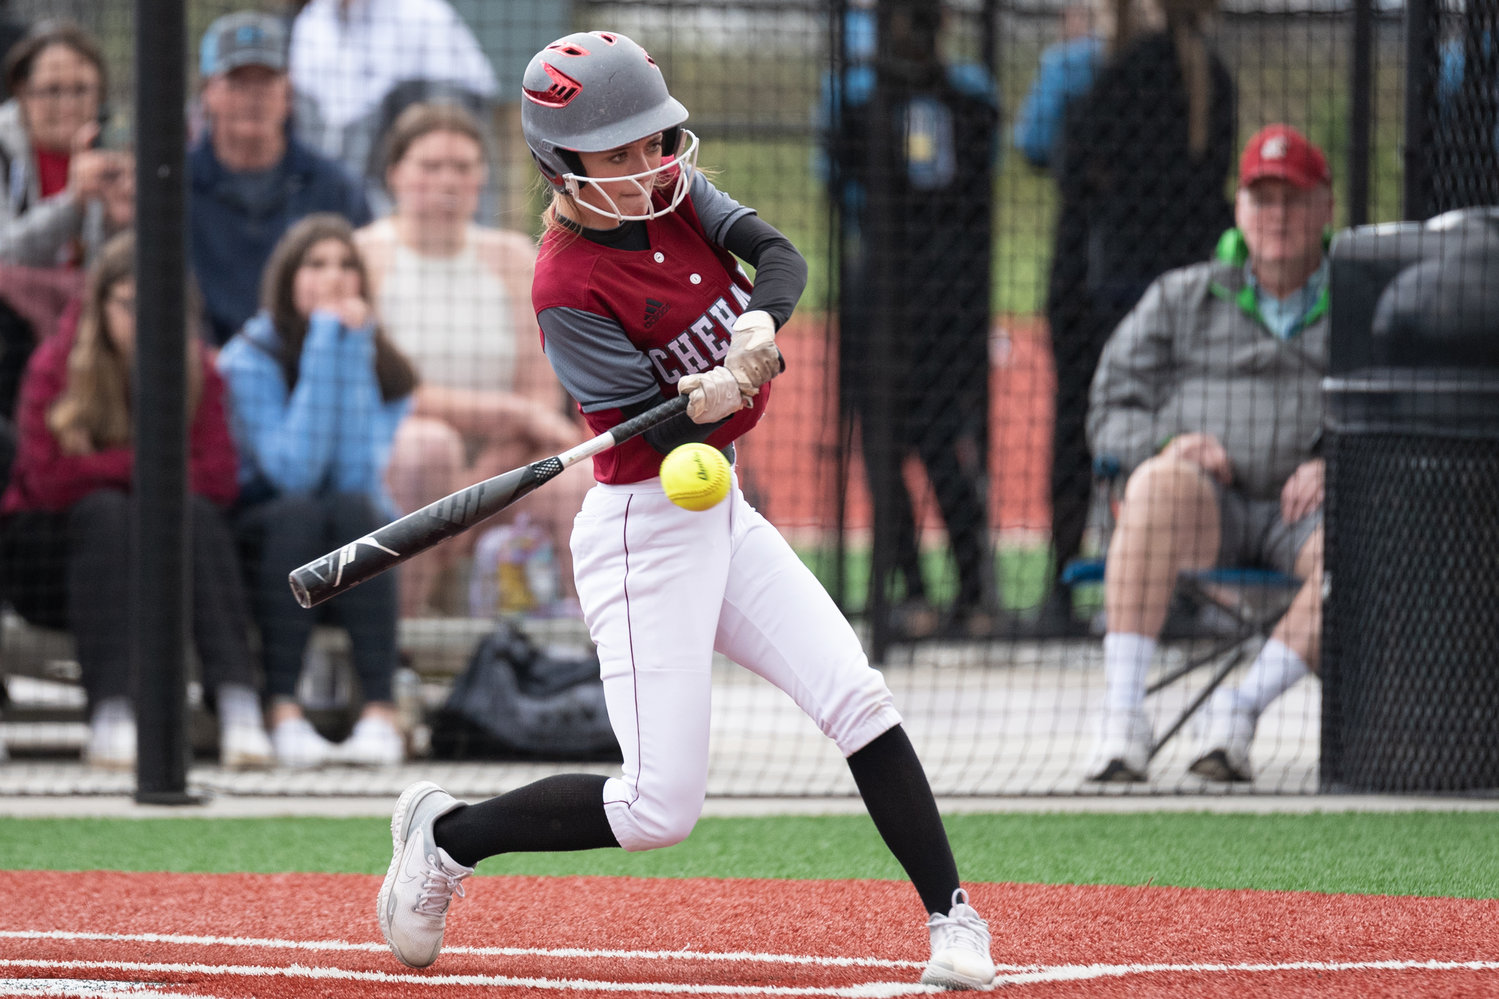 W.F. West infielder Brielle Etter swings at a pitch against Columbia River in the 2A District 4 tournament at Recreation Park May 19.